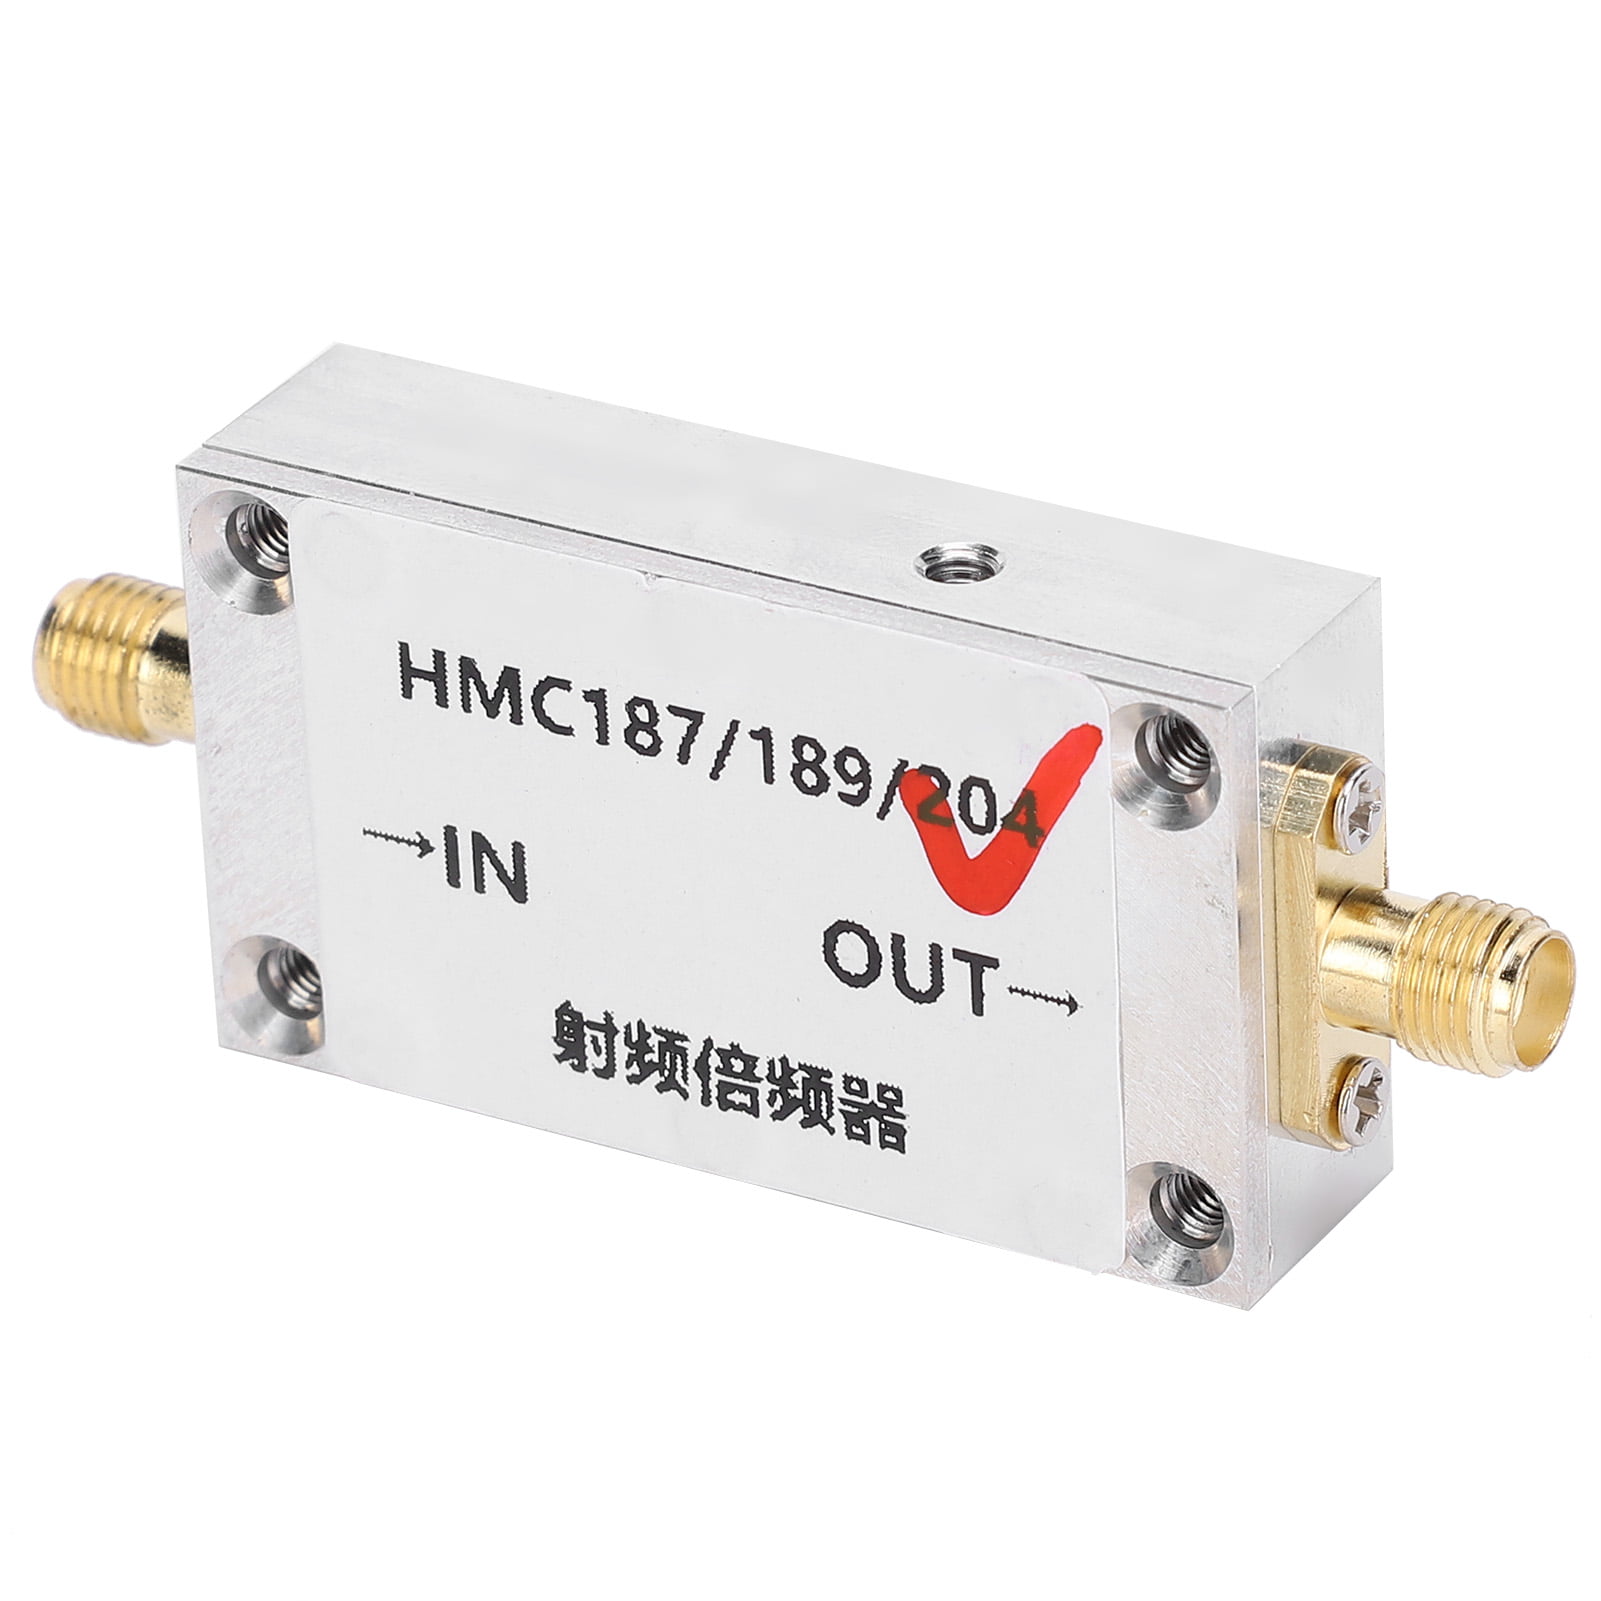 HMC204 RF Frequency Multiplier Frequency Doubler With Shell RF Input 4-8GHz pans 